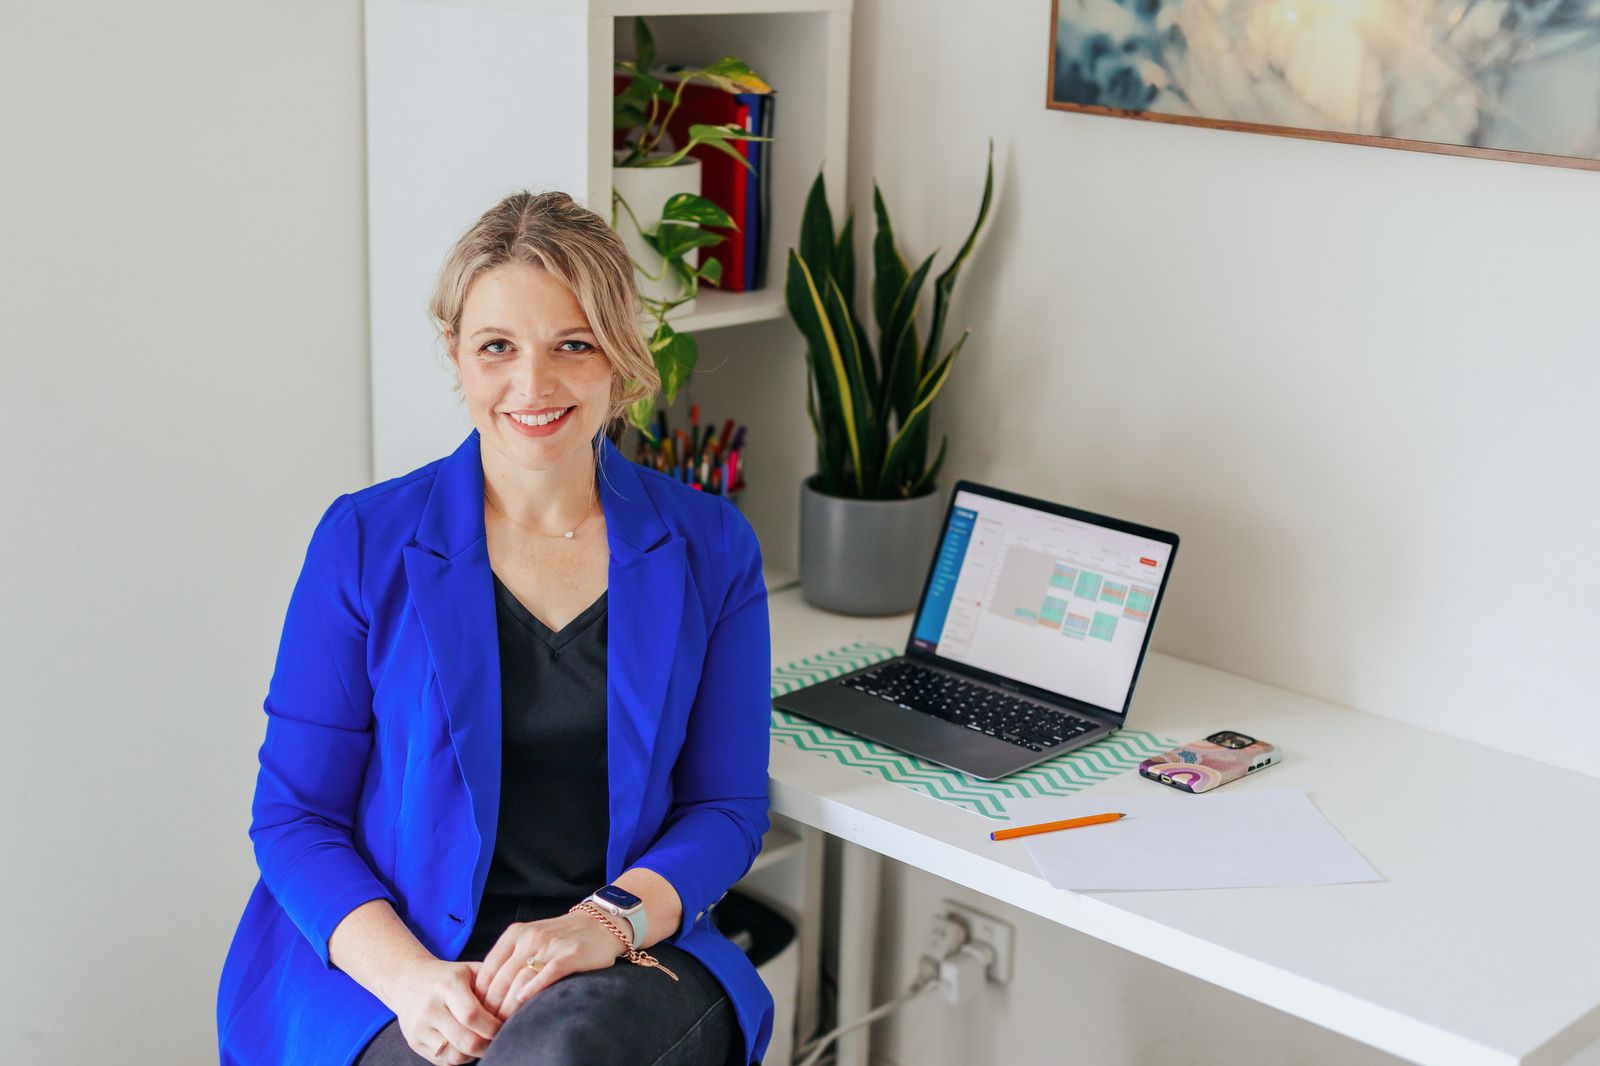 Kim Archer, co-owner of Complete Communication Speech Pathology, posed sitting in front of her laptop computer